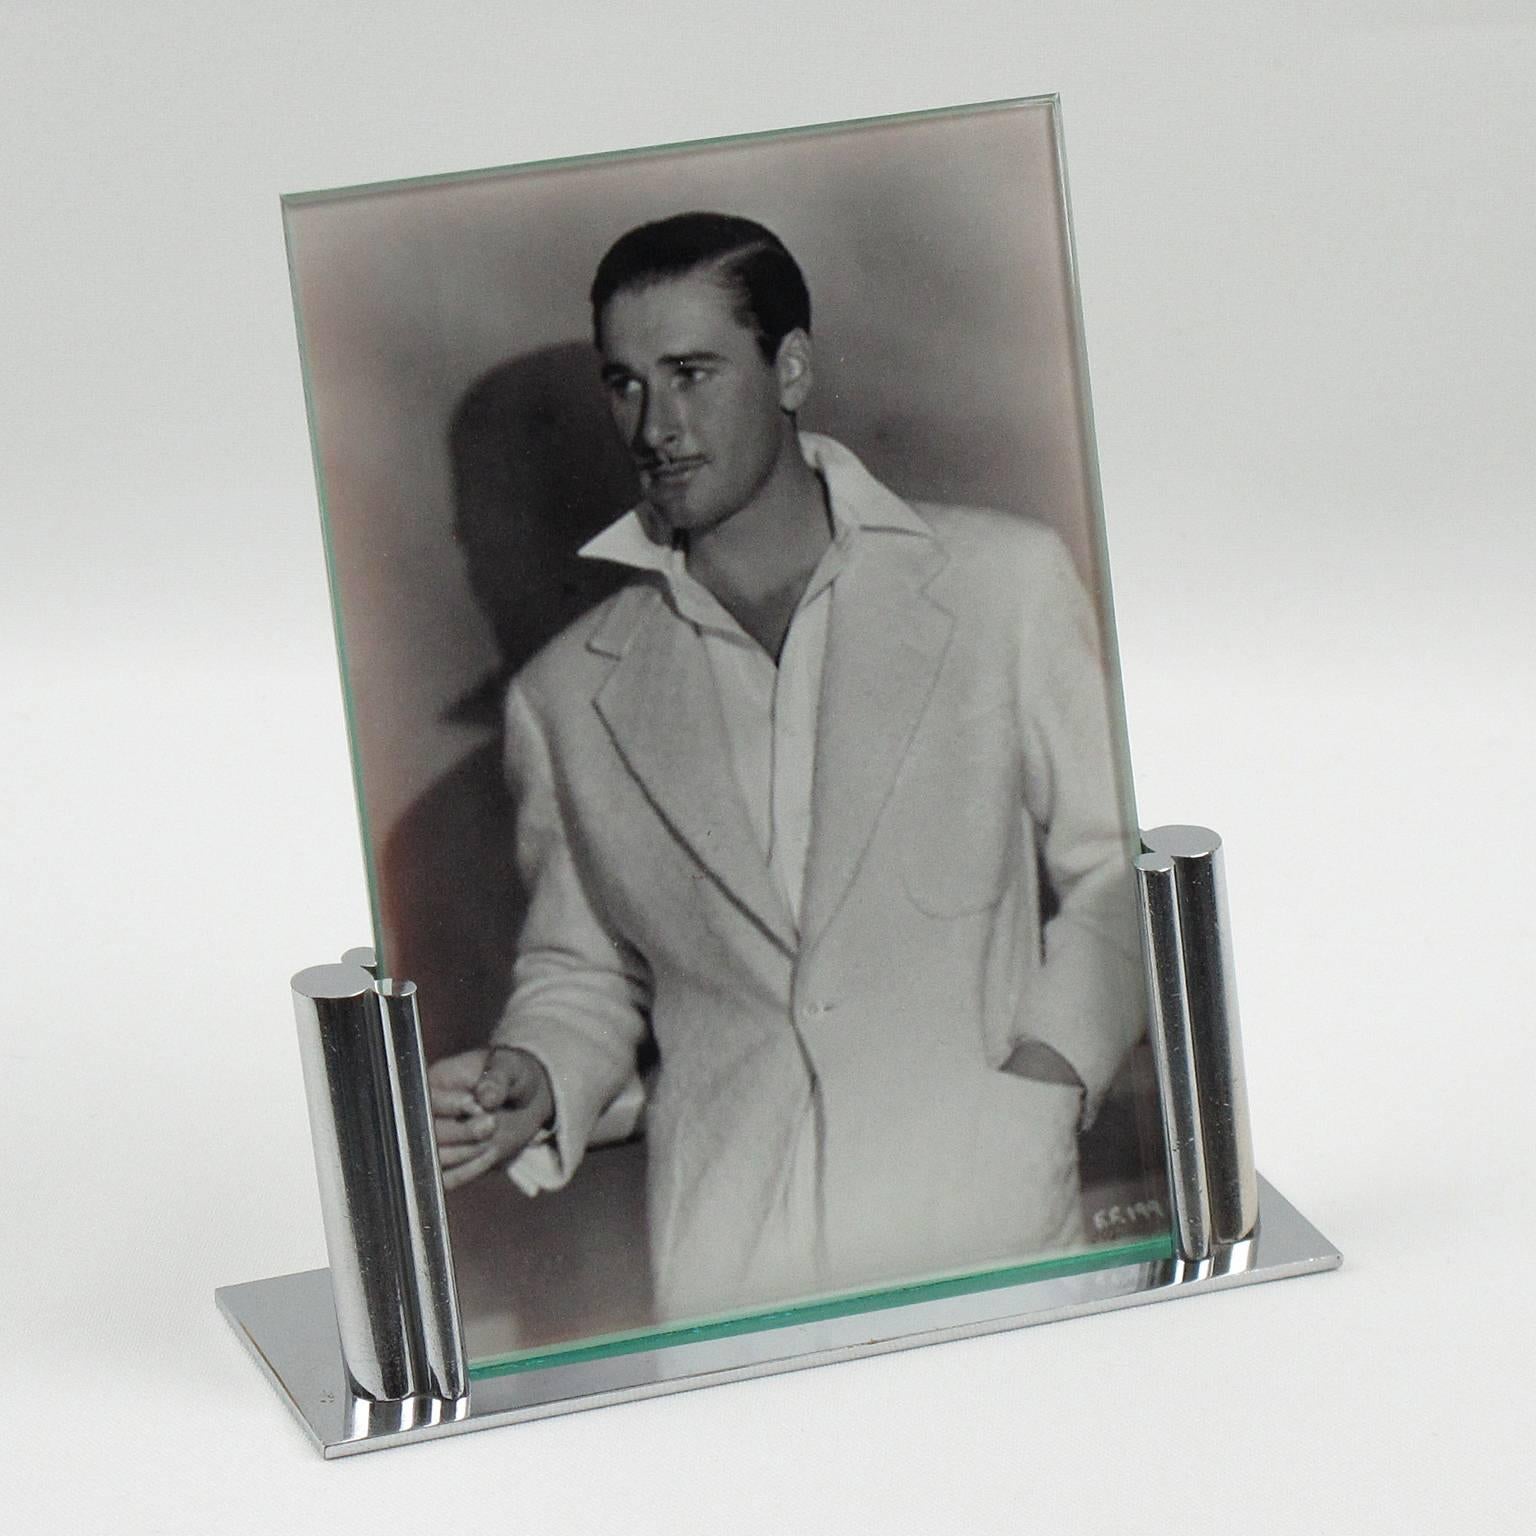 French Art Deco picture photo frame. Architectural all chrome shape with flat rectangular base and two vertical frame supports with geometrical detailing. The two supports hold one piece of glass on the front and one sheet of metal at the back which